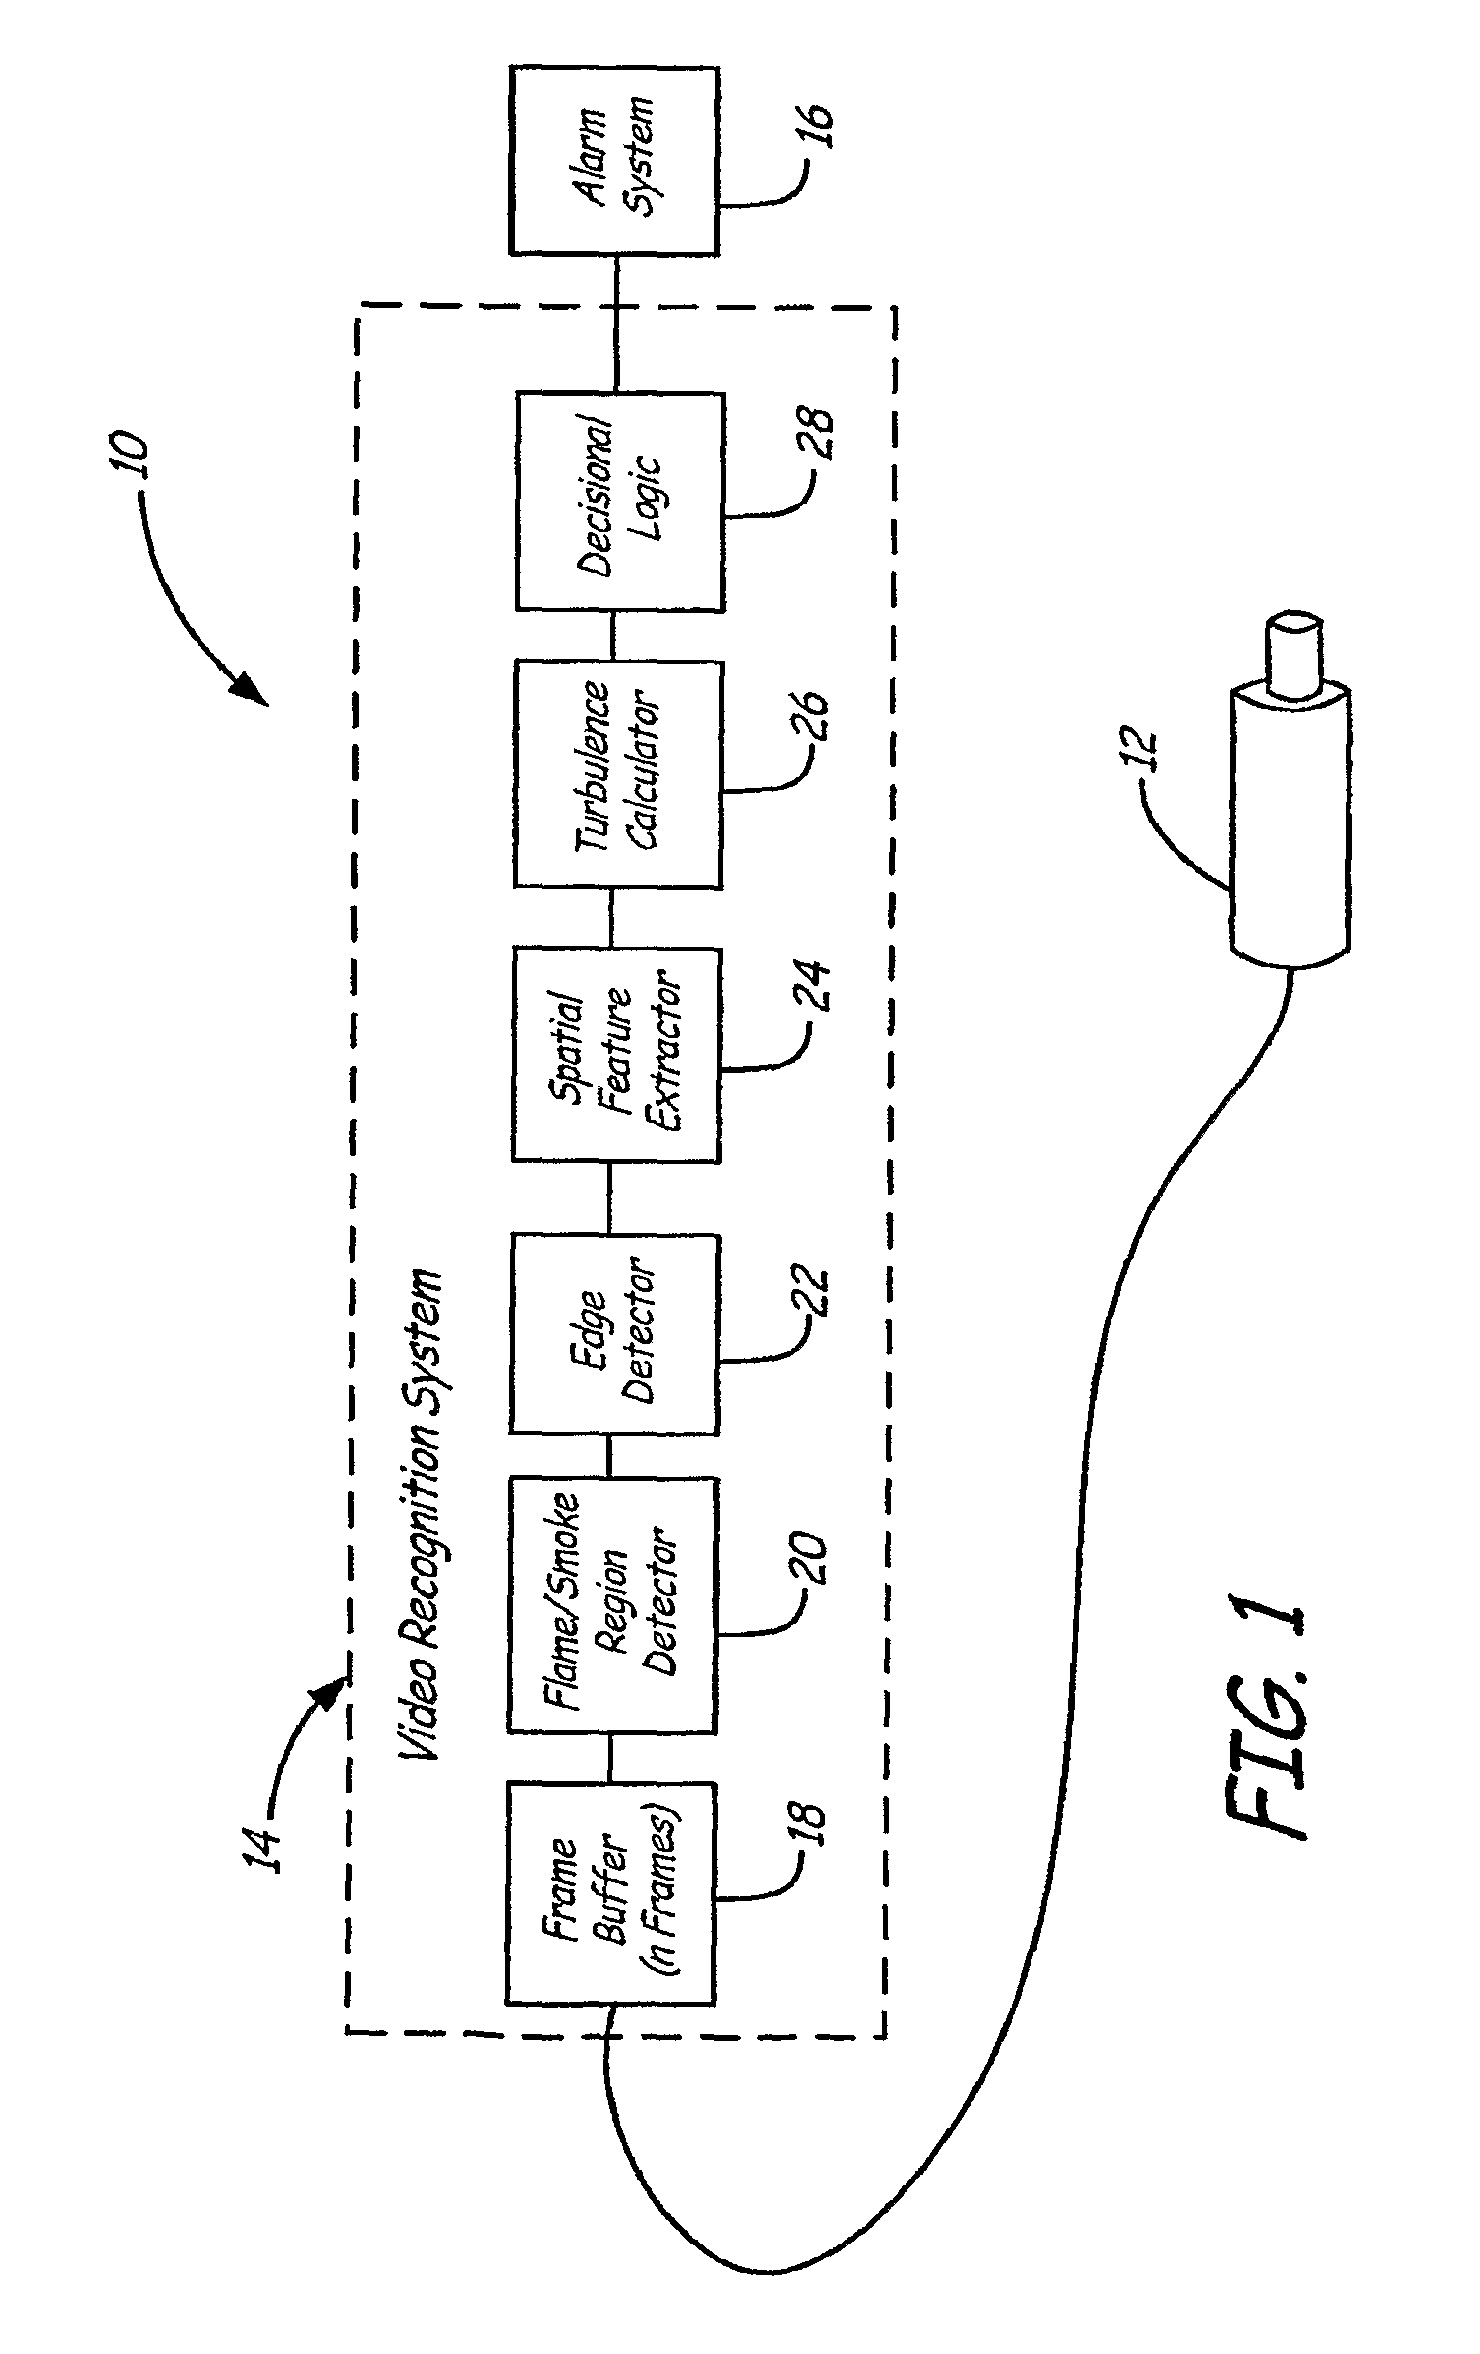 System and method for video detection of smoke and flame